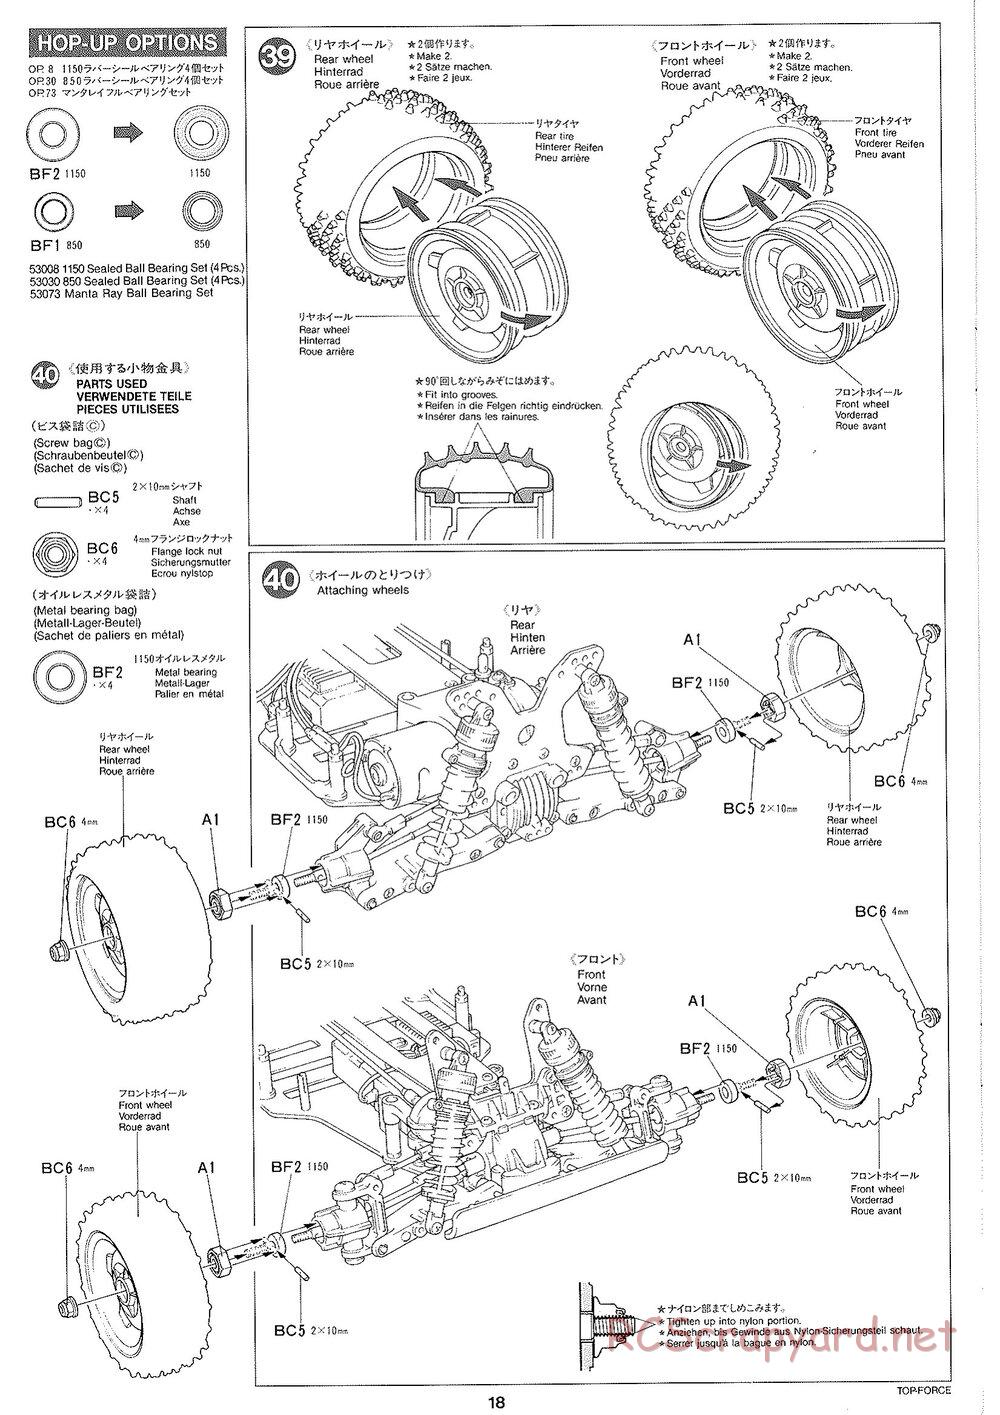 Tamiya - Top Force 2005 - DF-01 Chassis - Manual - Page 18